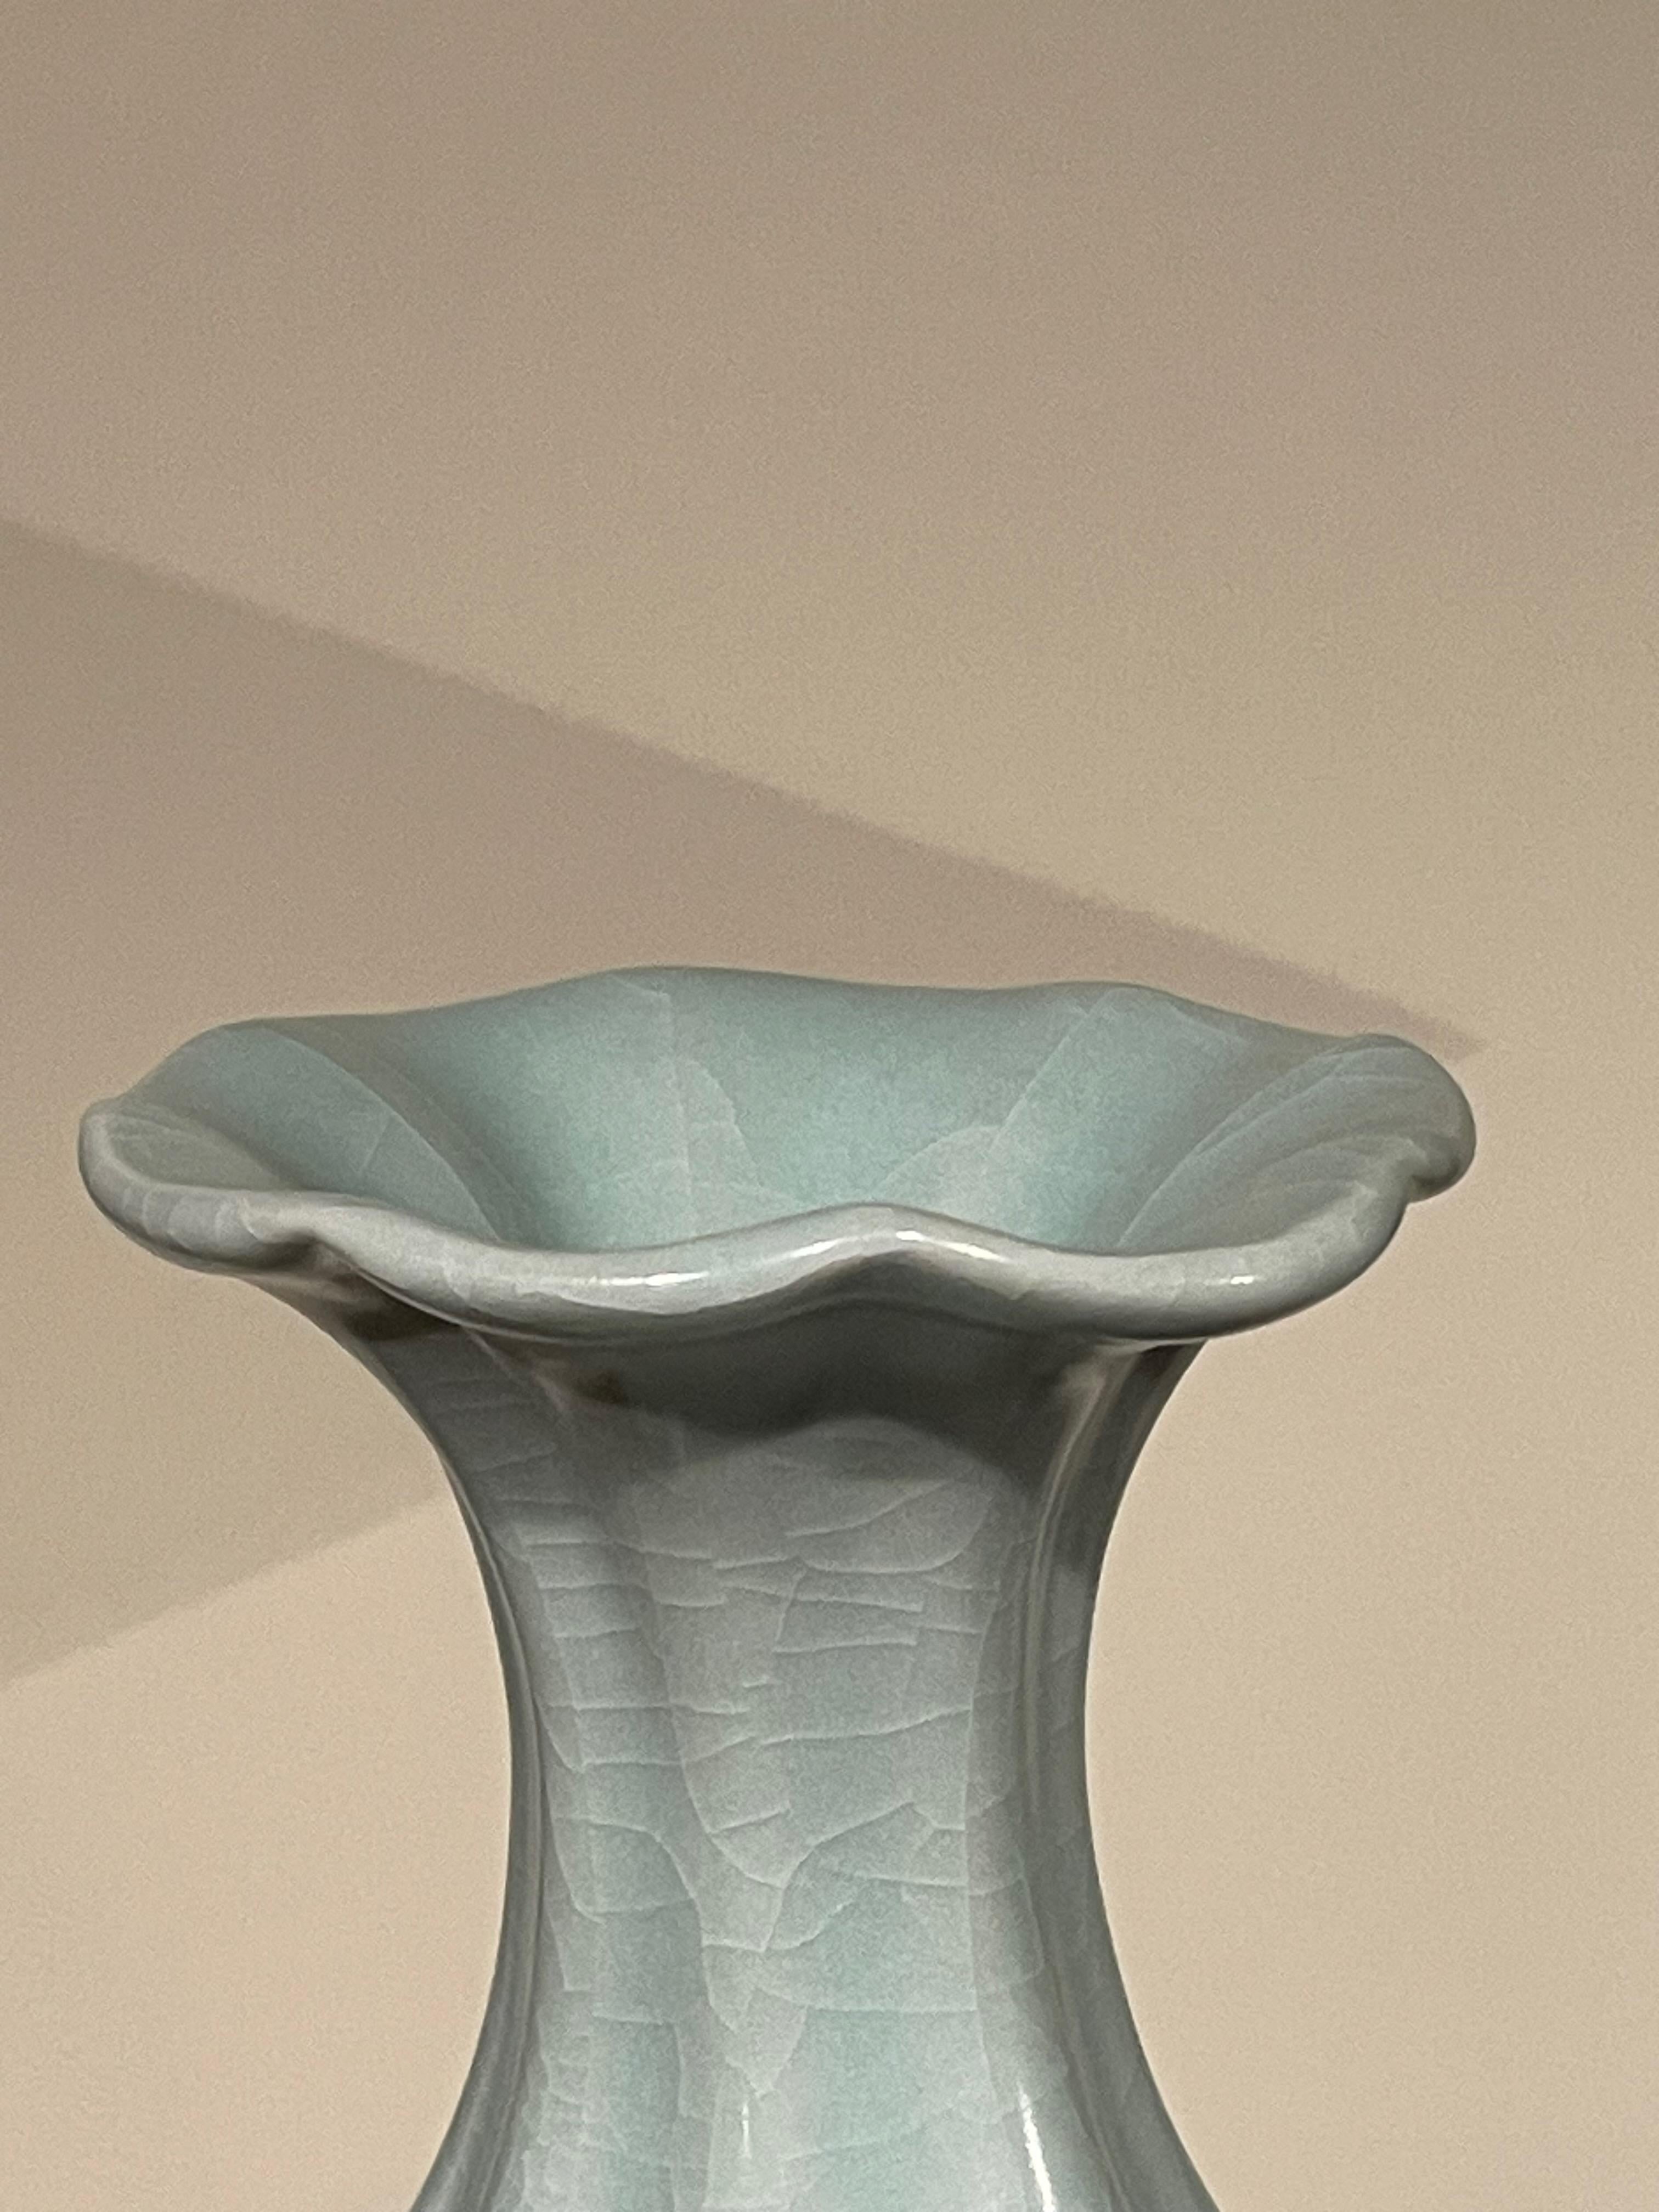 Contemporary Chinese pale turquoise vase.
Wavy top with ribbed curved base.
Large collection available with varying sizes and shapes.
ARRIVING APRIL